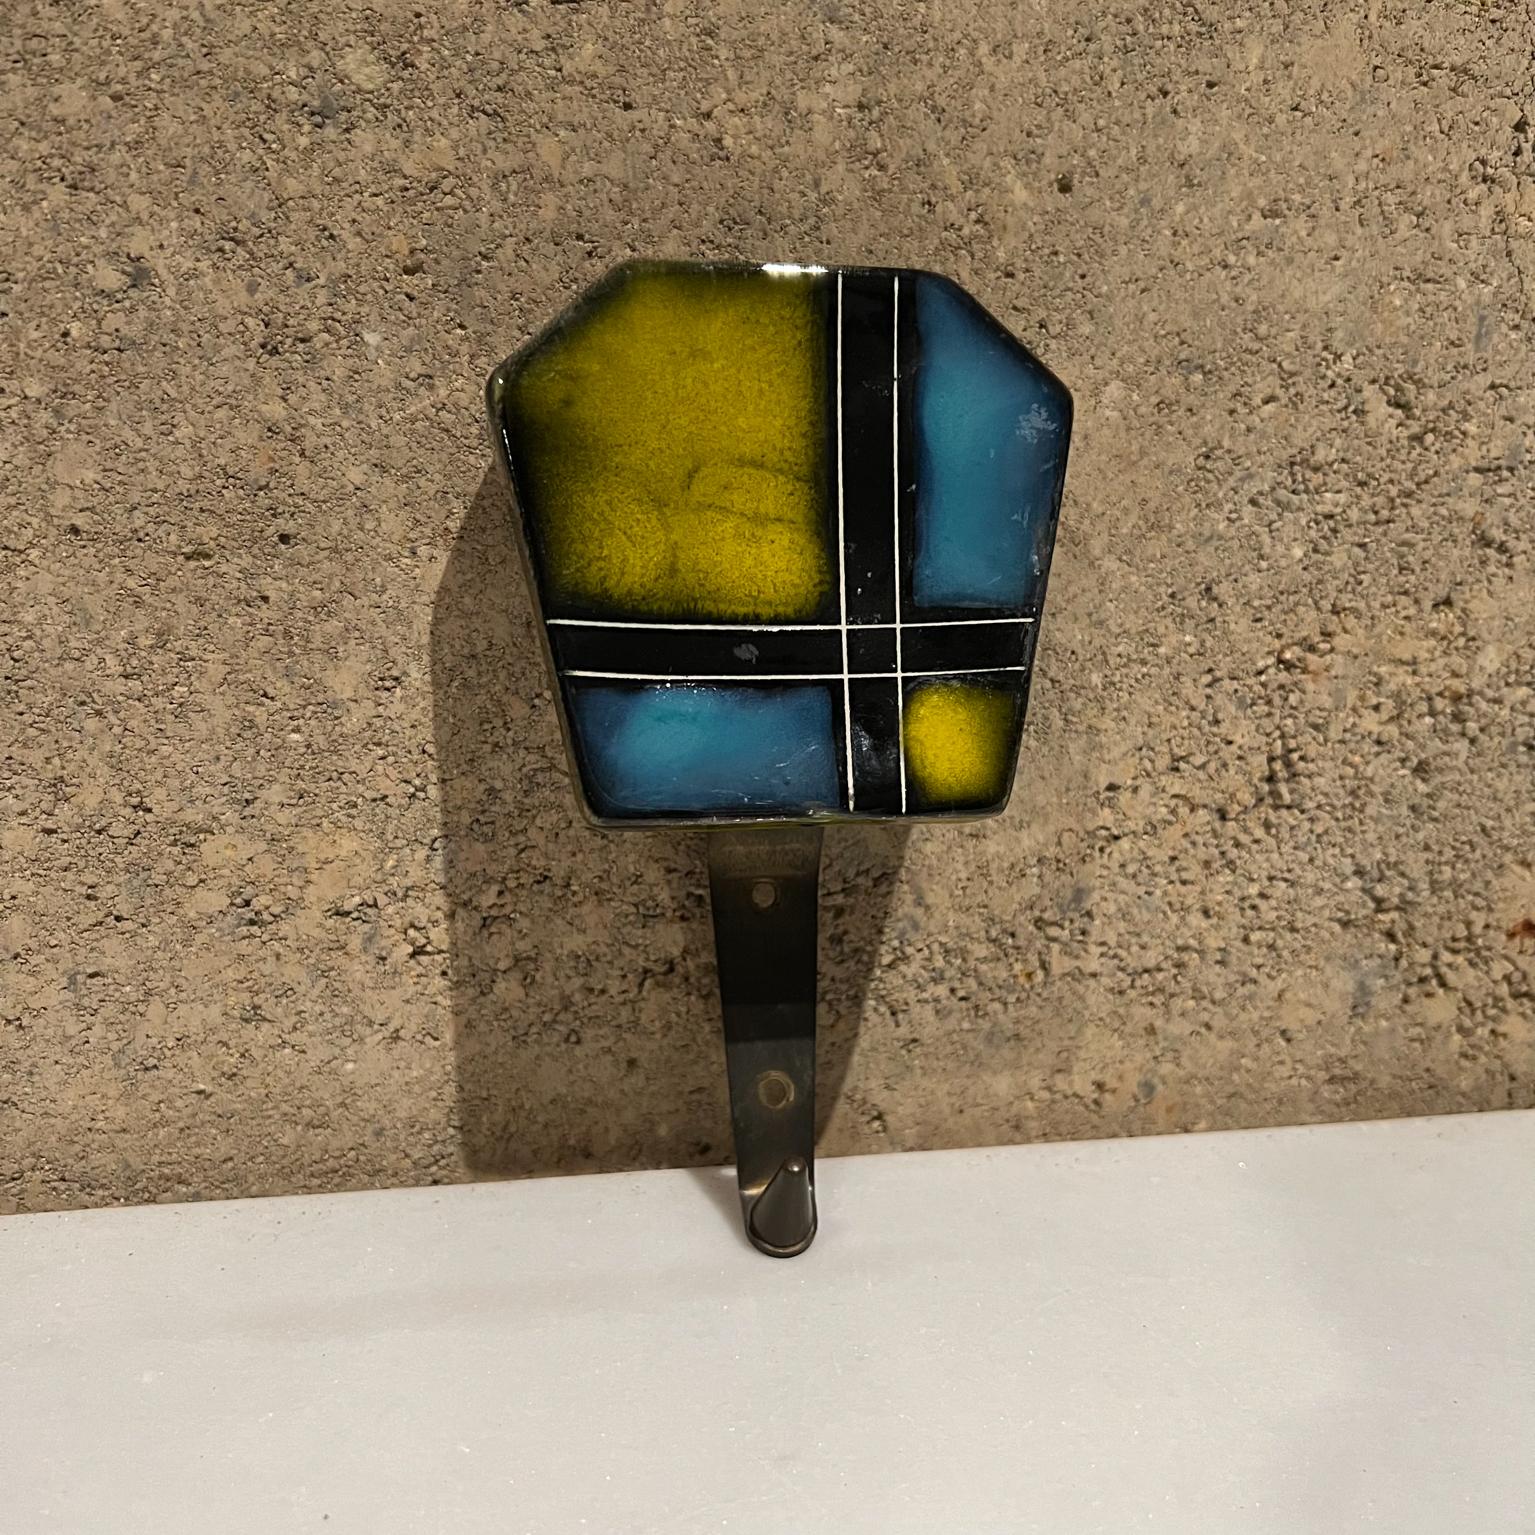 Coat hat rack hook in ceramic iron porcelain and brass. Made in Europe 1950s
Pattern blue plaid.
Measures: 3.5 wide x 6 tall x 2.
Original unrestored vintage preowned condition.
Refer to images provided.

